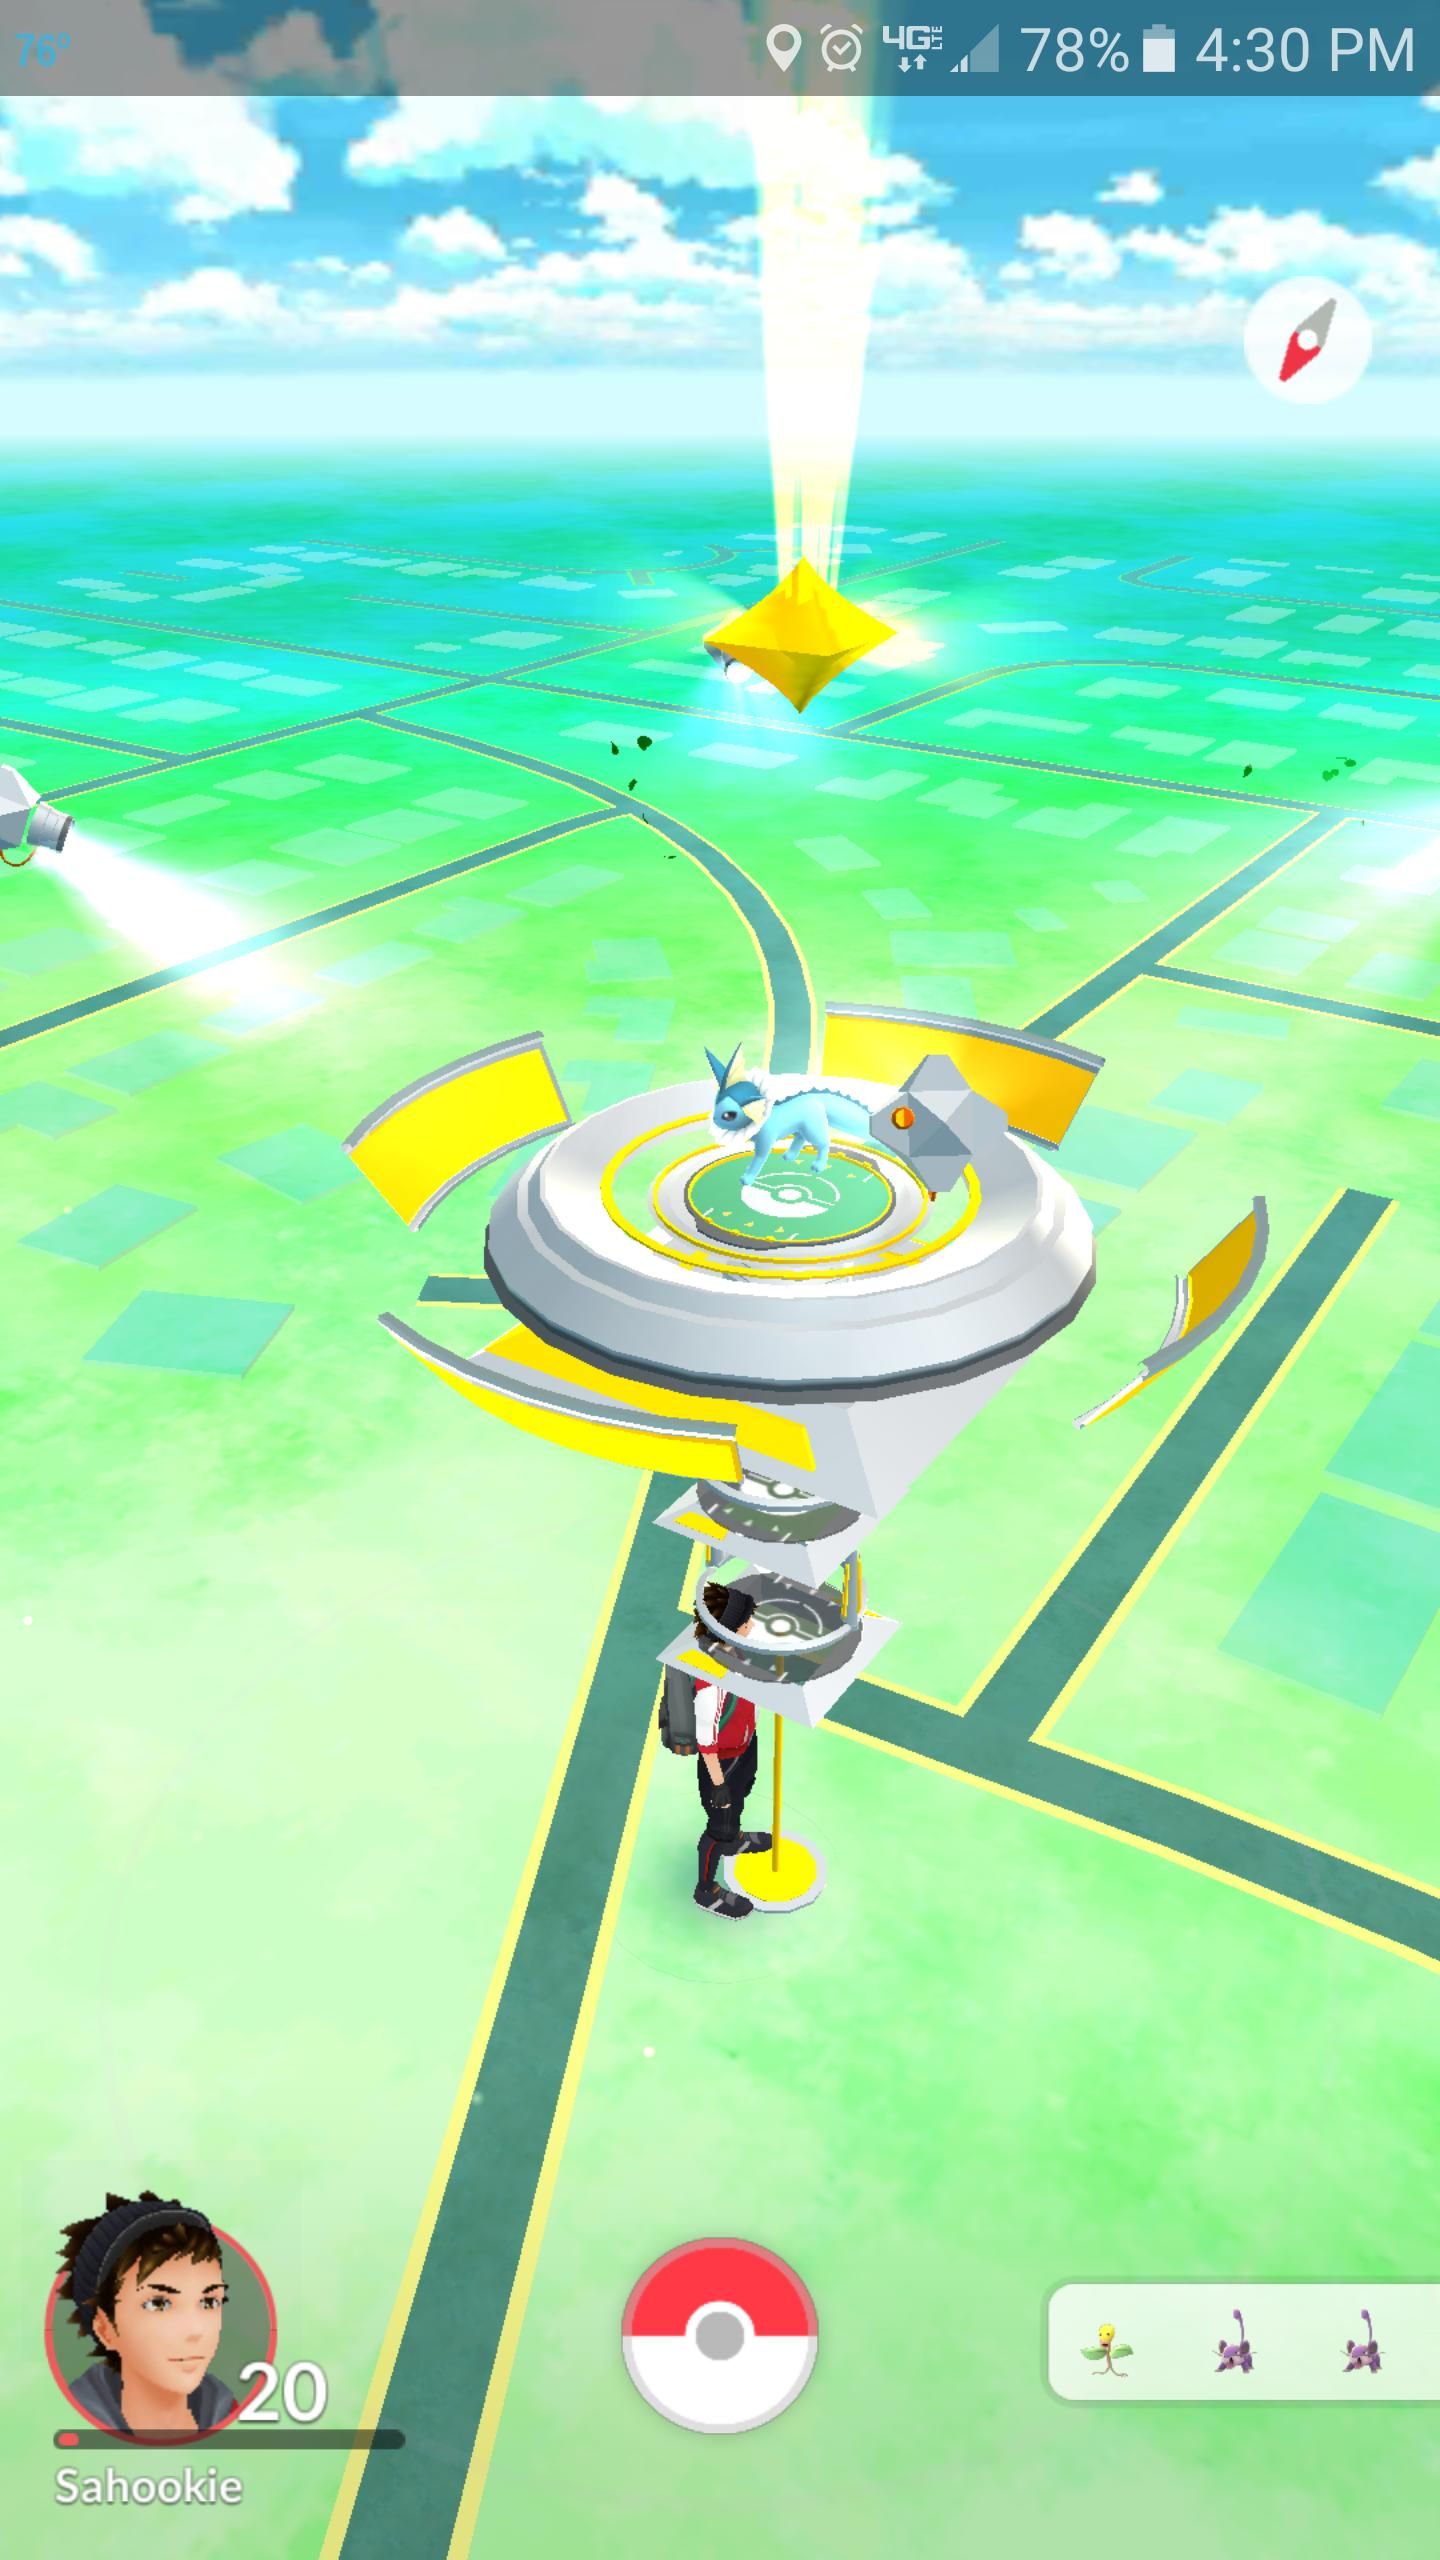 Anyone else experiencing the weird glitch where gyms sometimes turn yellow?